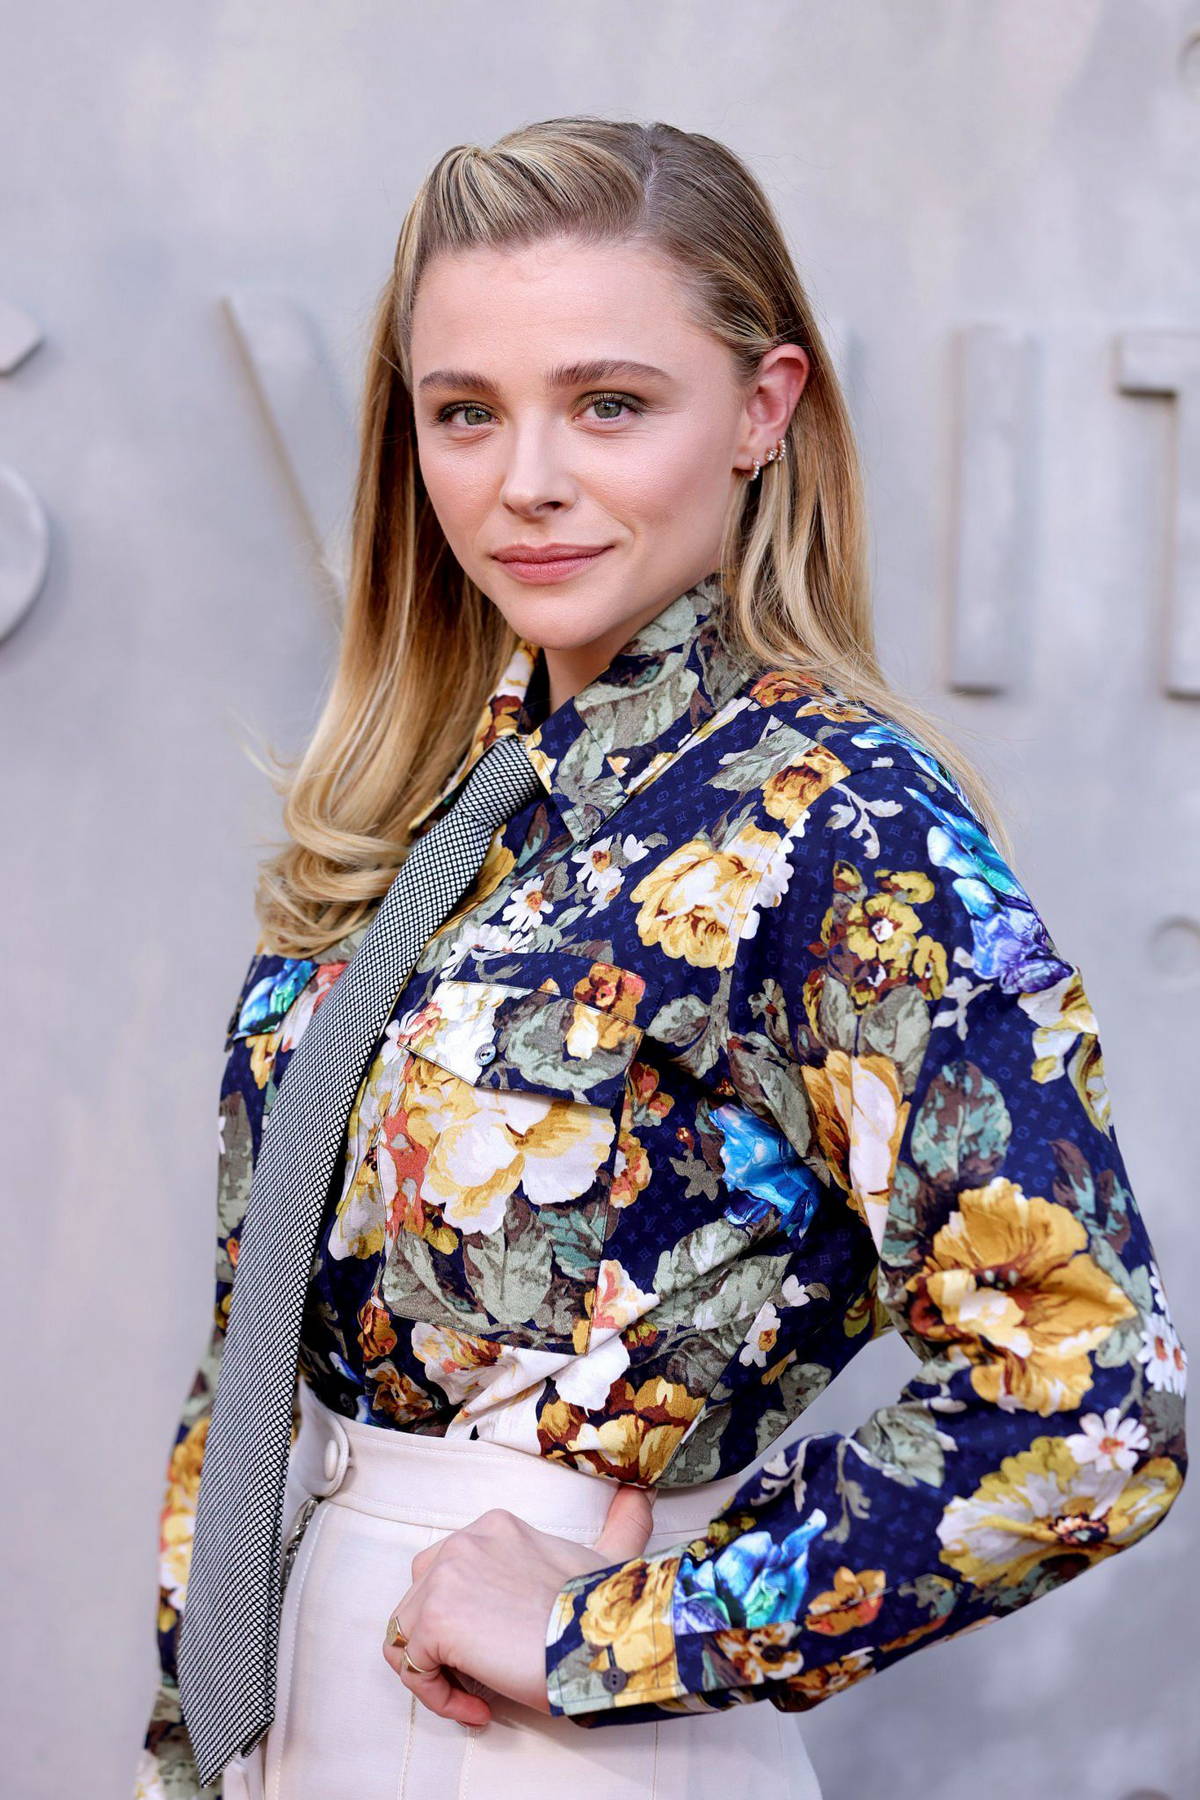 Chloe Grace Moretz attends the Glamour Women of the Year Awards 2023 at the  Jazz At Lincoln Center in New York City